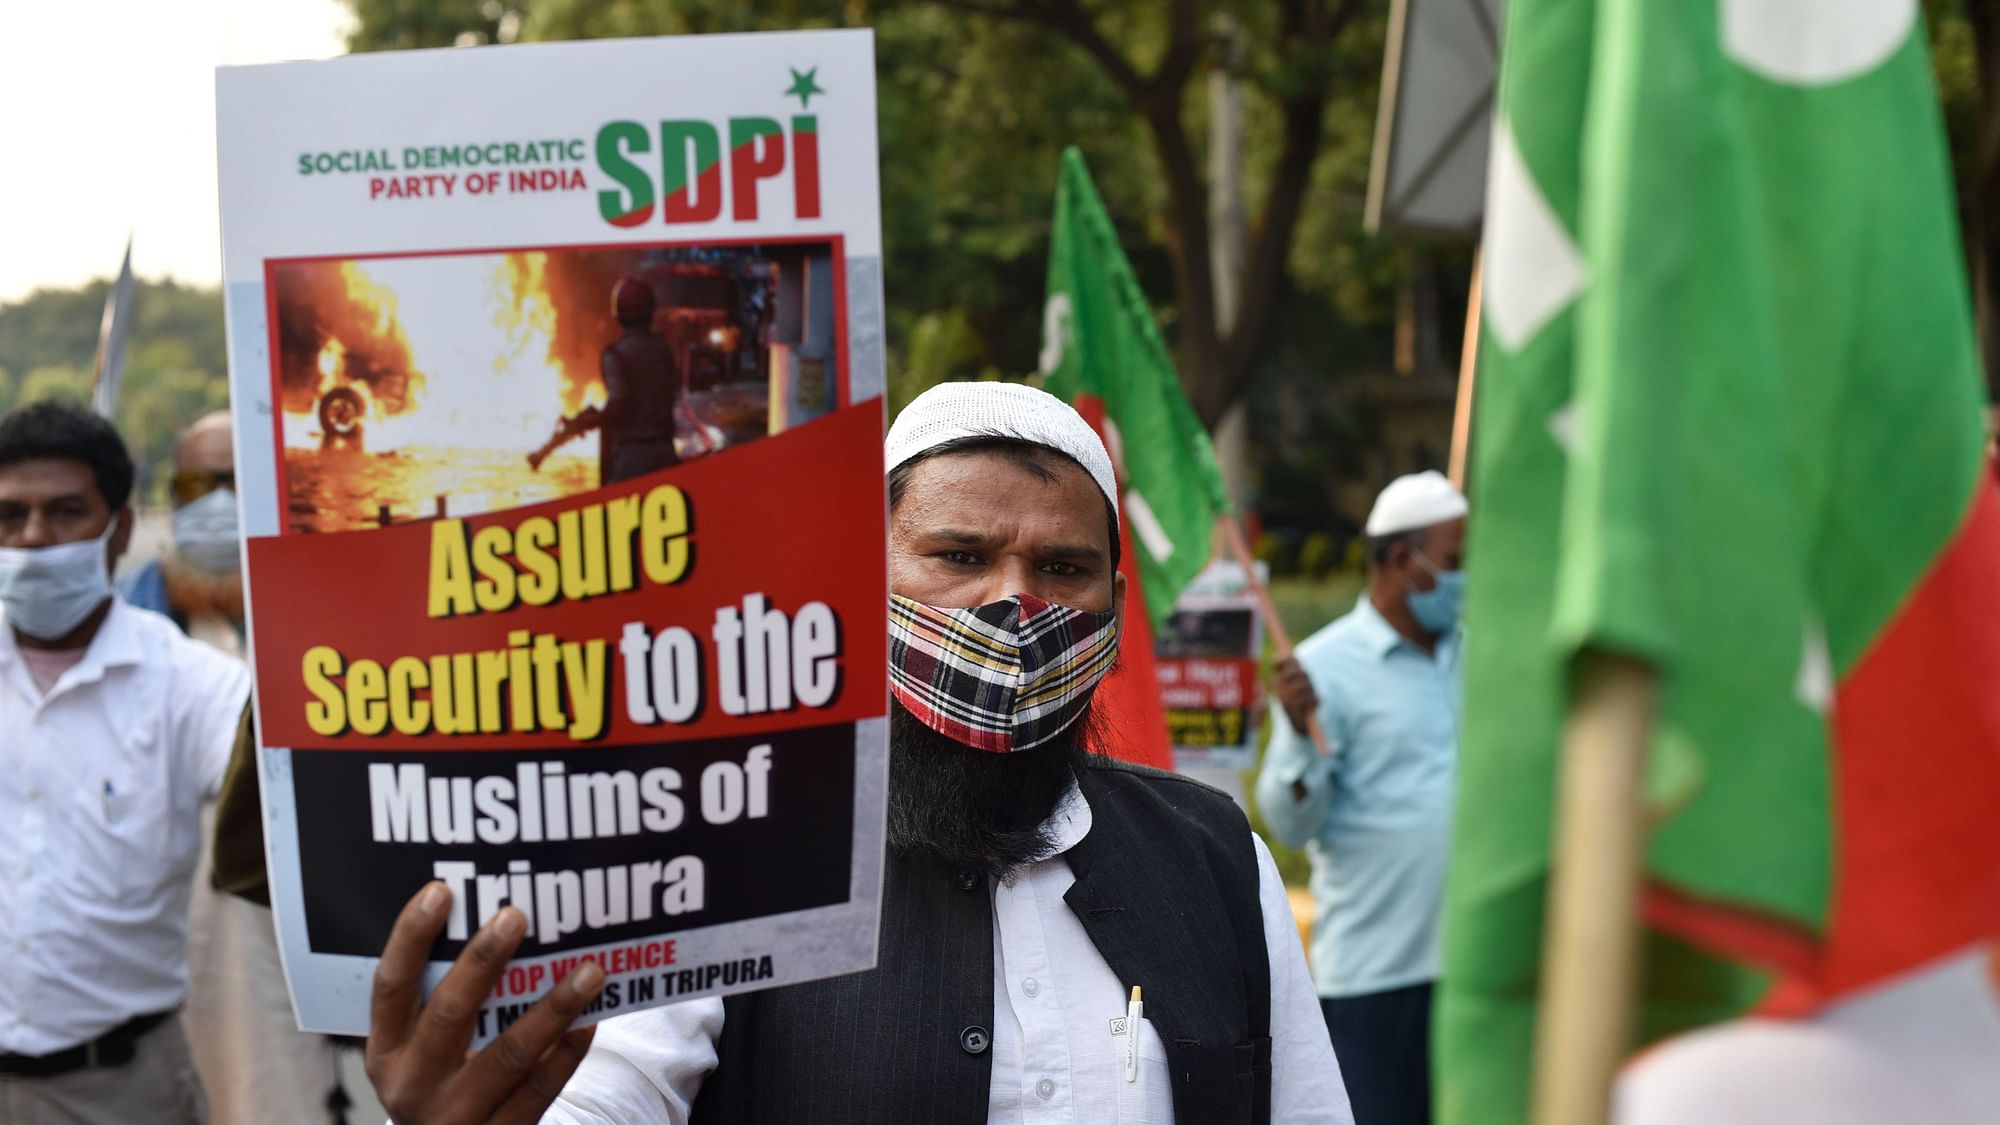 <div class="paragraphs"><p>Social Democratic Party of India (SDPI) members stage a protest against Tripura violence outside the Tripura Bhawan, in New Delhi, on Friday, 29 October. Image used for representational purposes.&nbsp;</p></div>